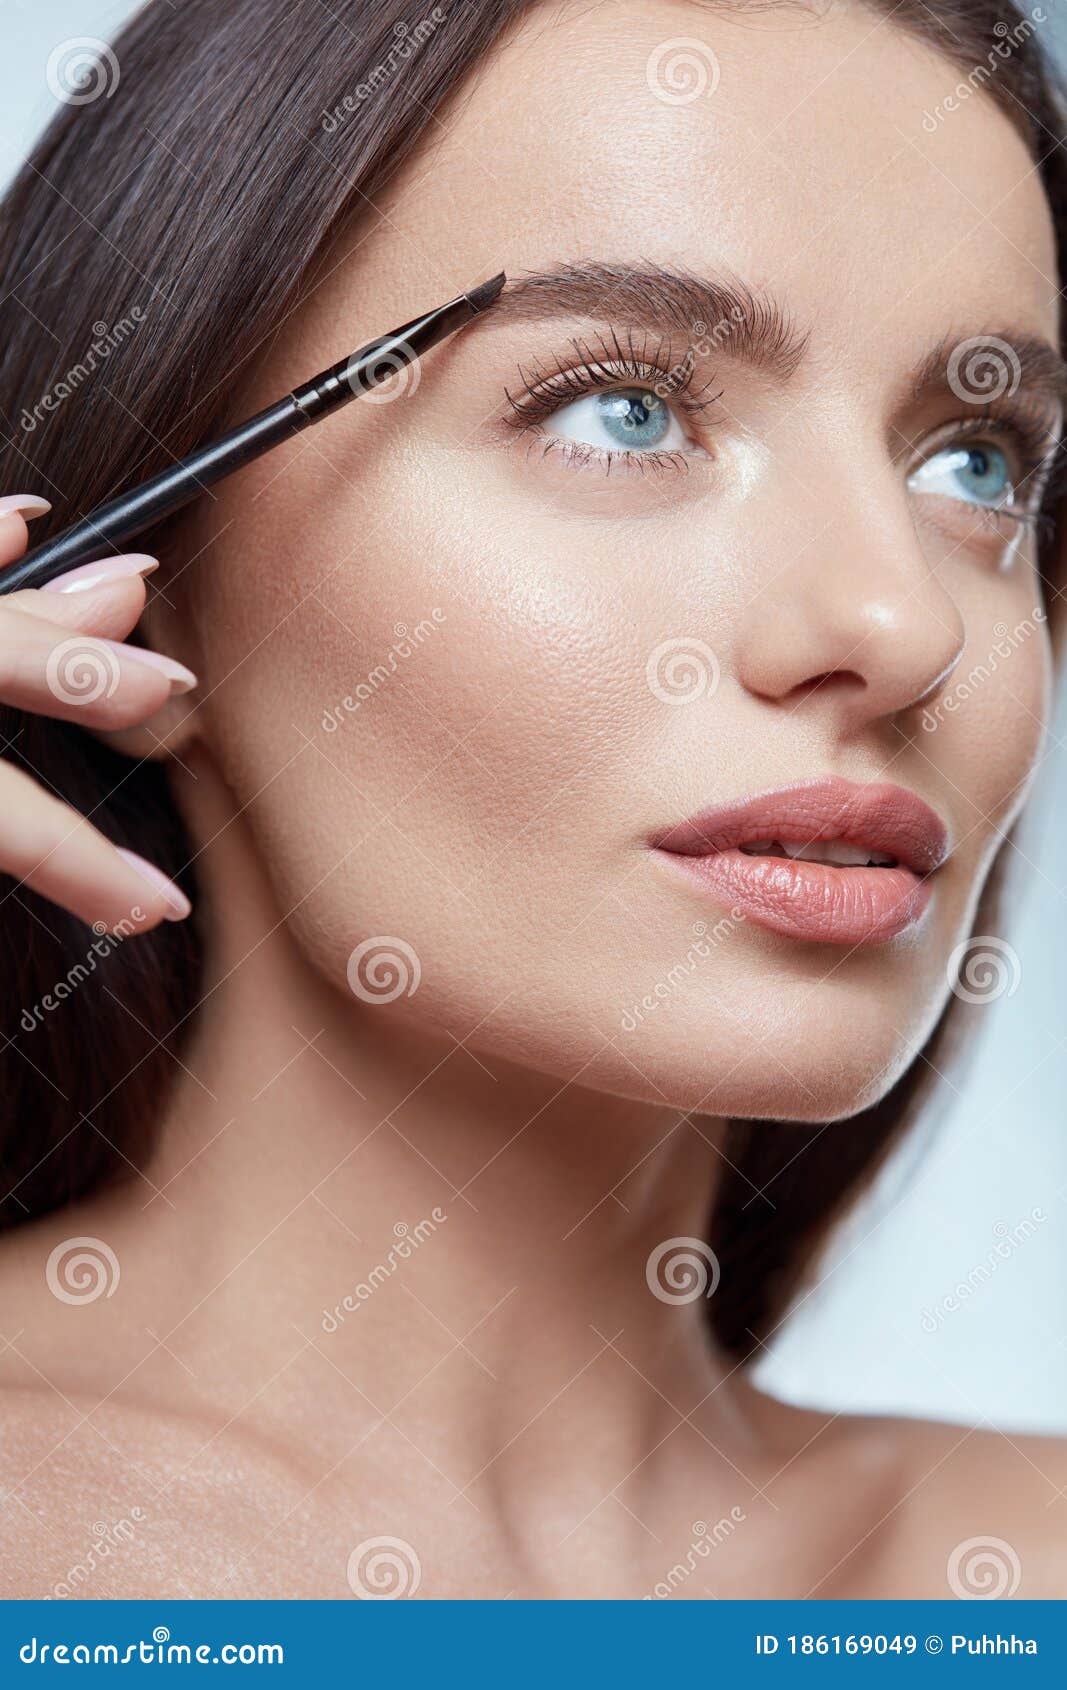 eyebrows makeup. woman shaping brow with cosmetic brush. beautiful girl close up portrait.